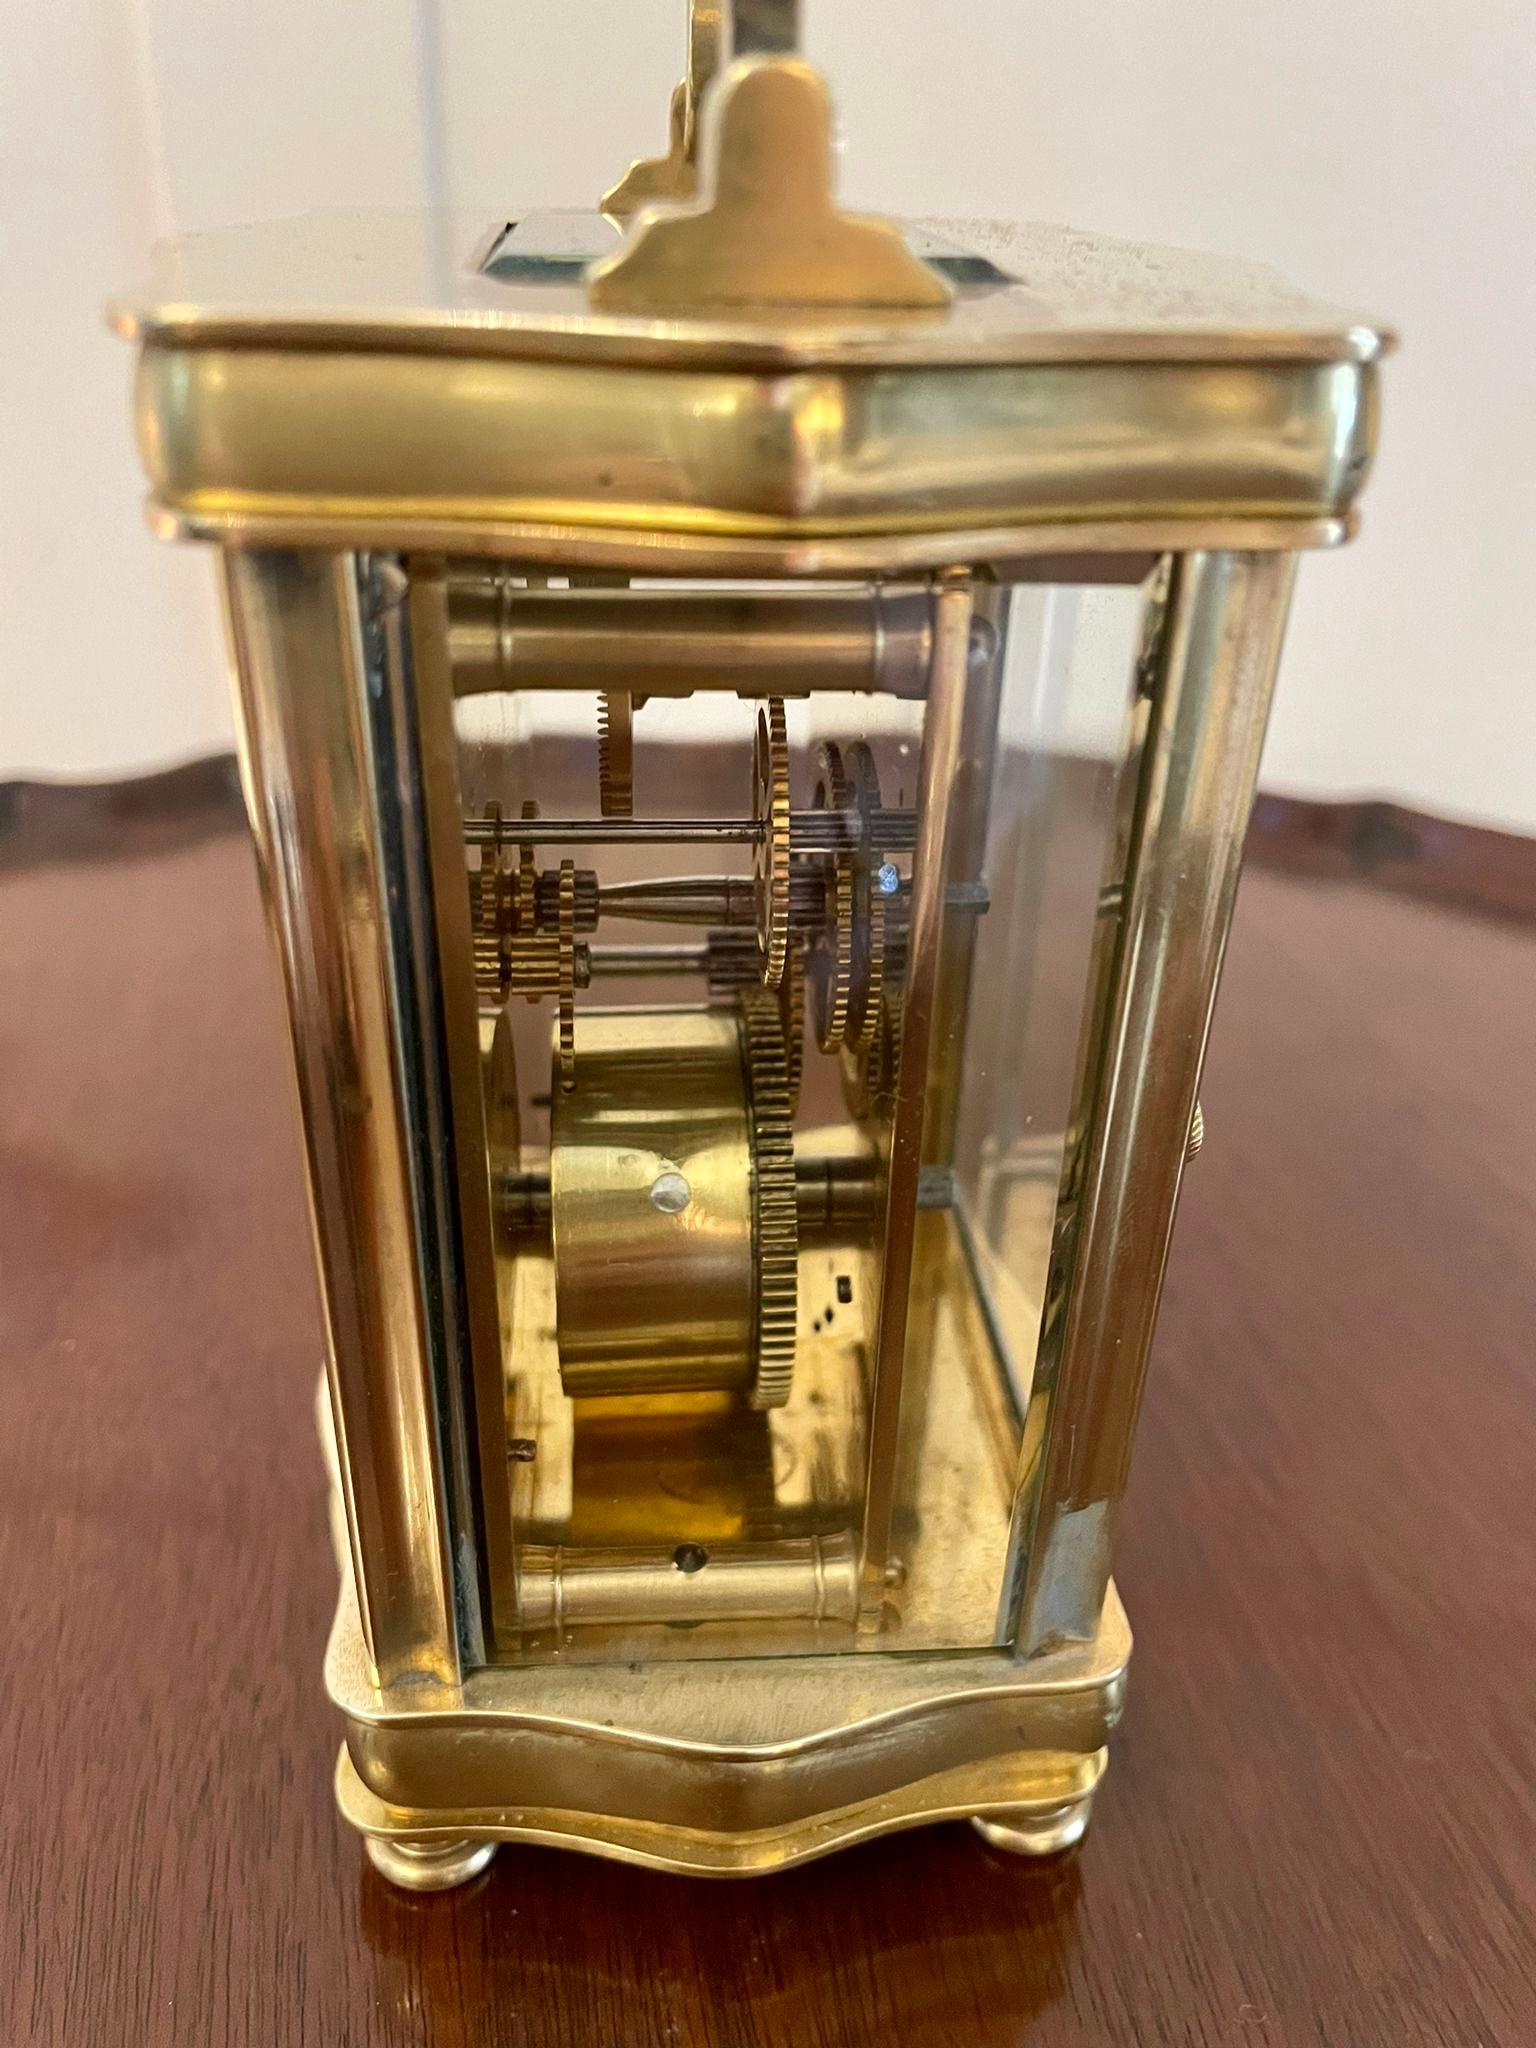 Antique French quality brass carriage clock having a quality brass serpentine shaped case with bevelled glass panels and door, shaped carrying handle to the top, enamel dial with original hands and Roman numerals, eight day movement and original